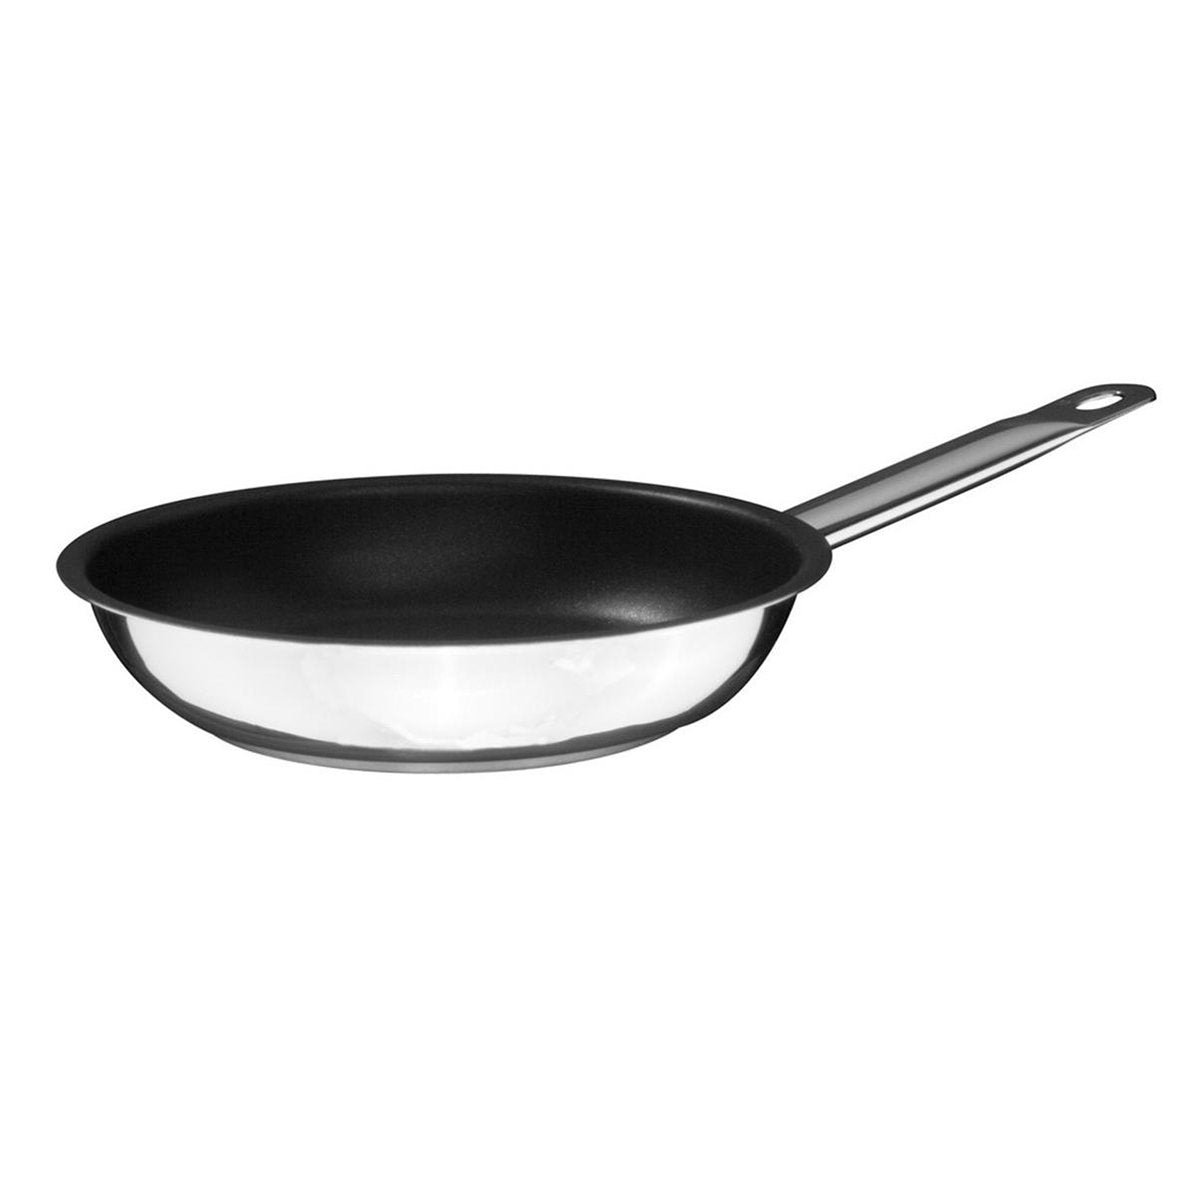 36*6 NON - STICK COATED FRYPAN - Mabrook Hotel Supplies